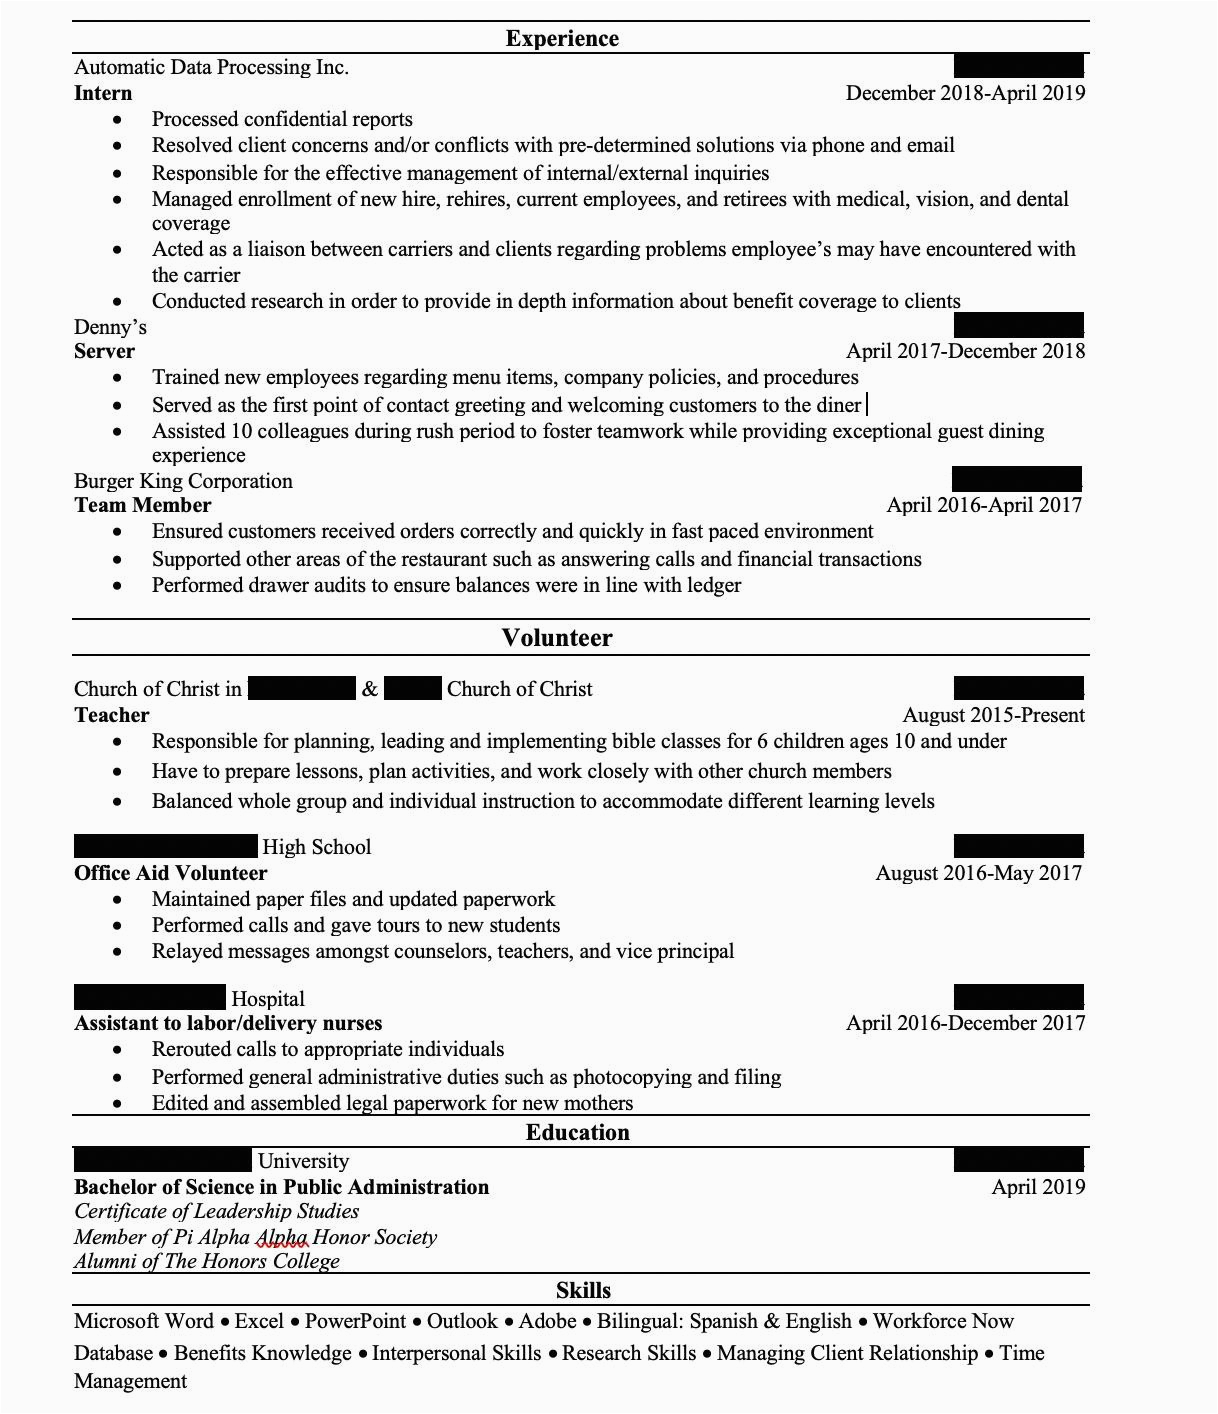 Sample Resume for An Entry Level Human Resource Position Human Resource Resume Hi Guys I Recently Graduated with